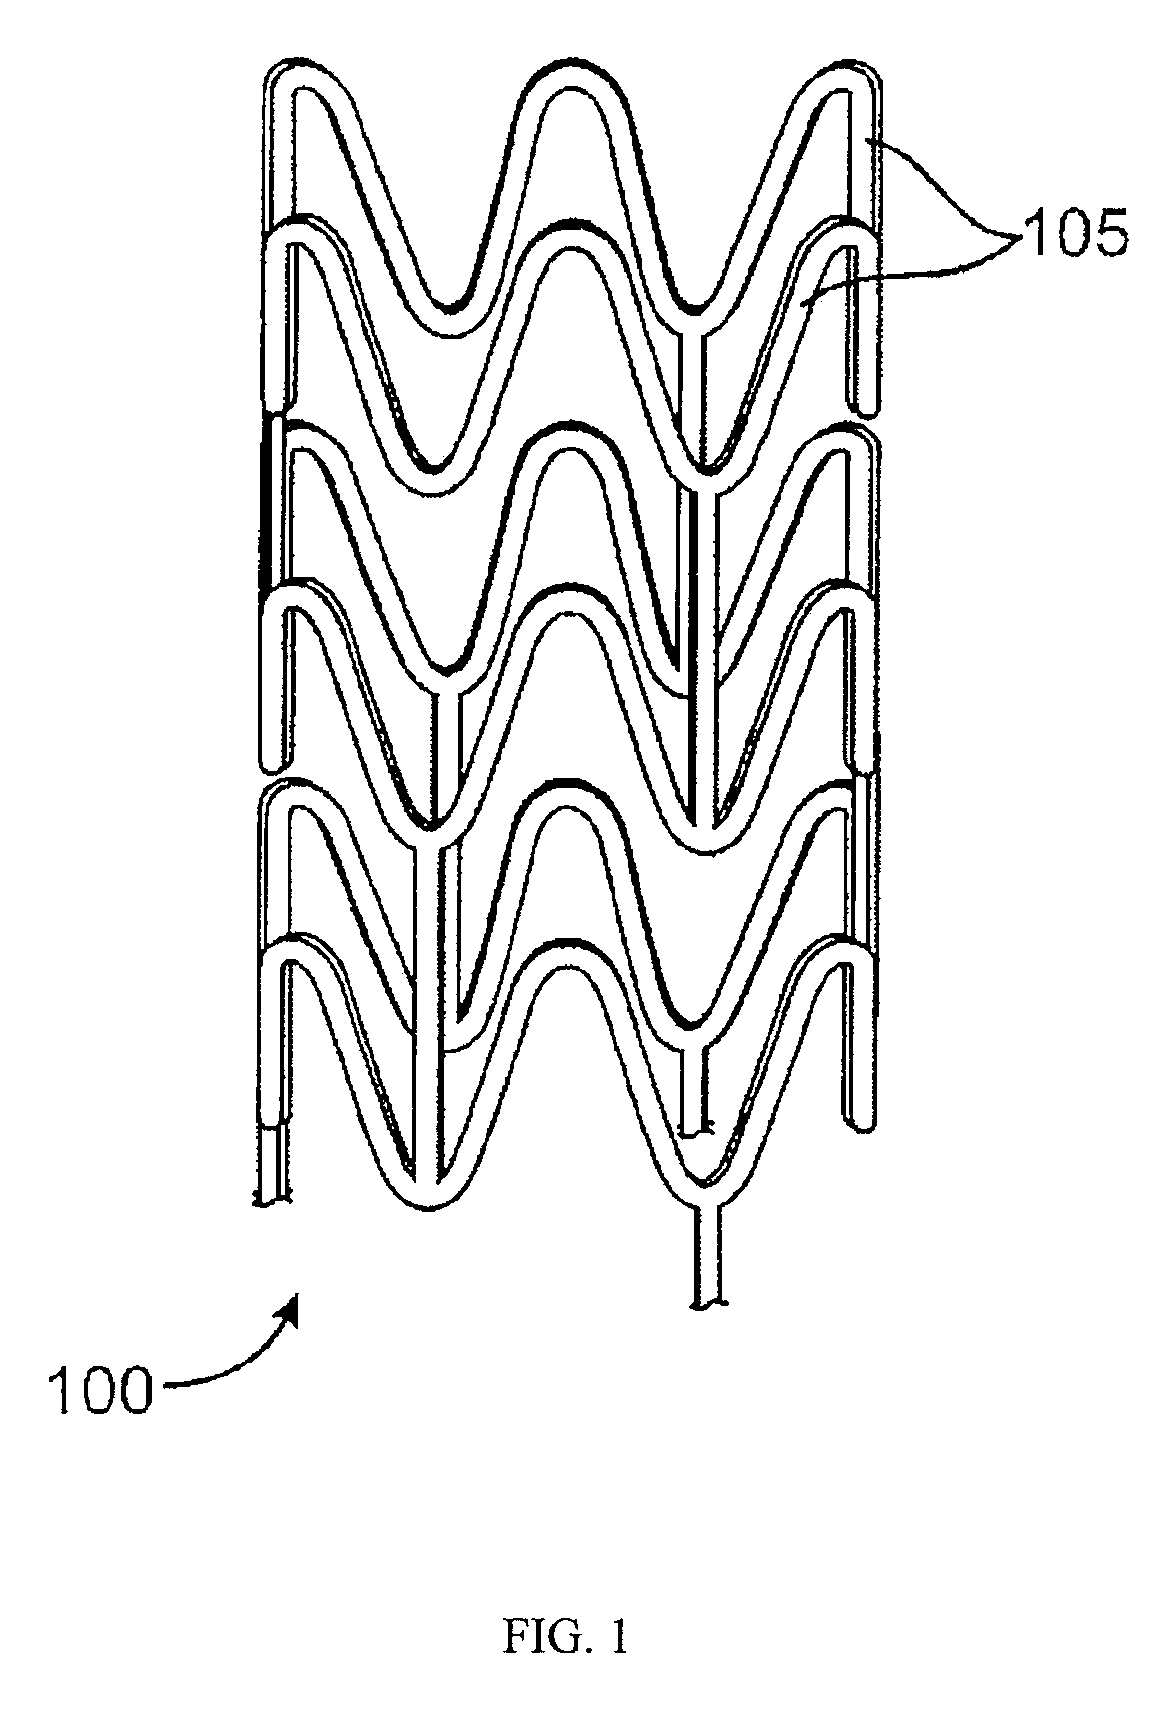 Stent Formed from Crosslinked Bioabsorbable Polymer and Methods of Making the Stent